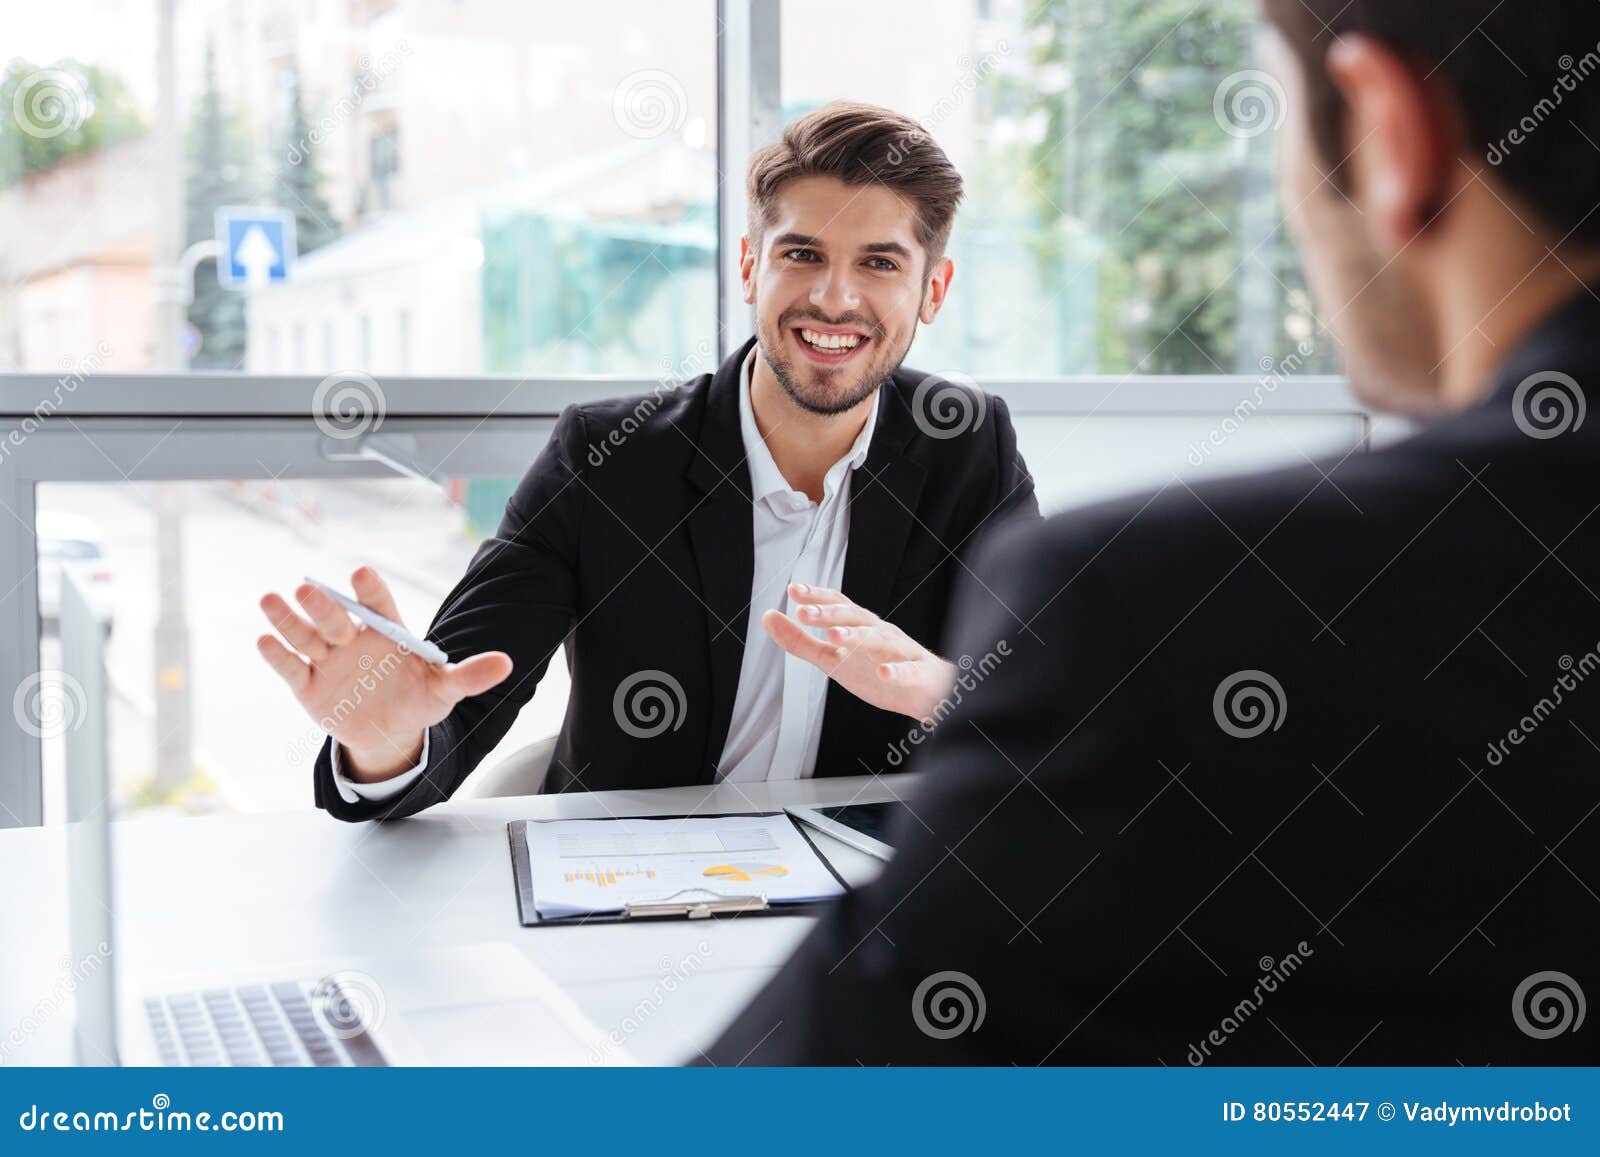 two happy young businessmen sitting and working on business meeting